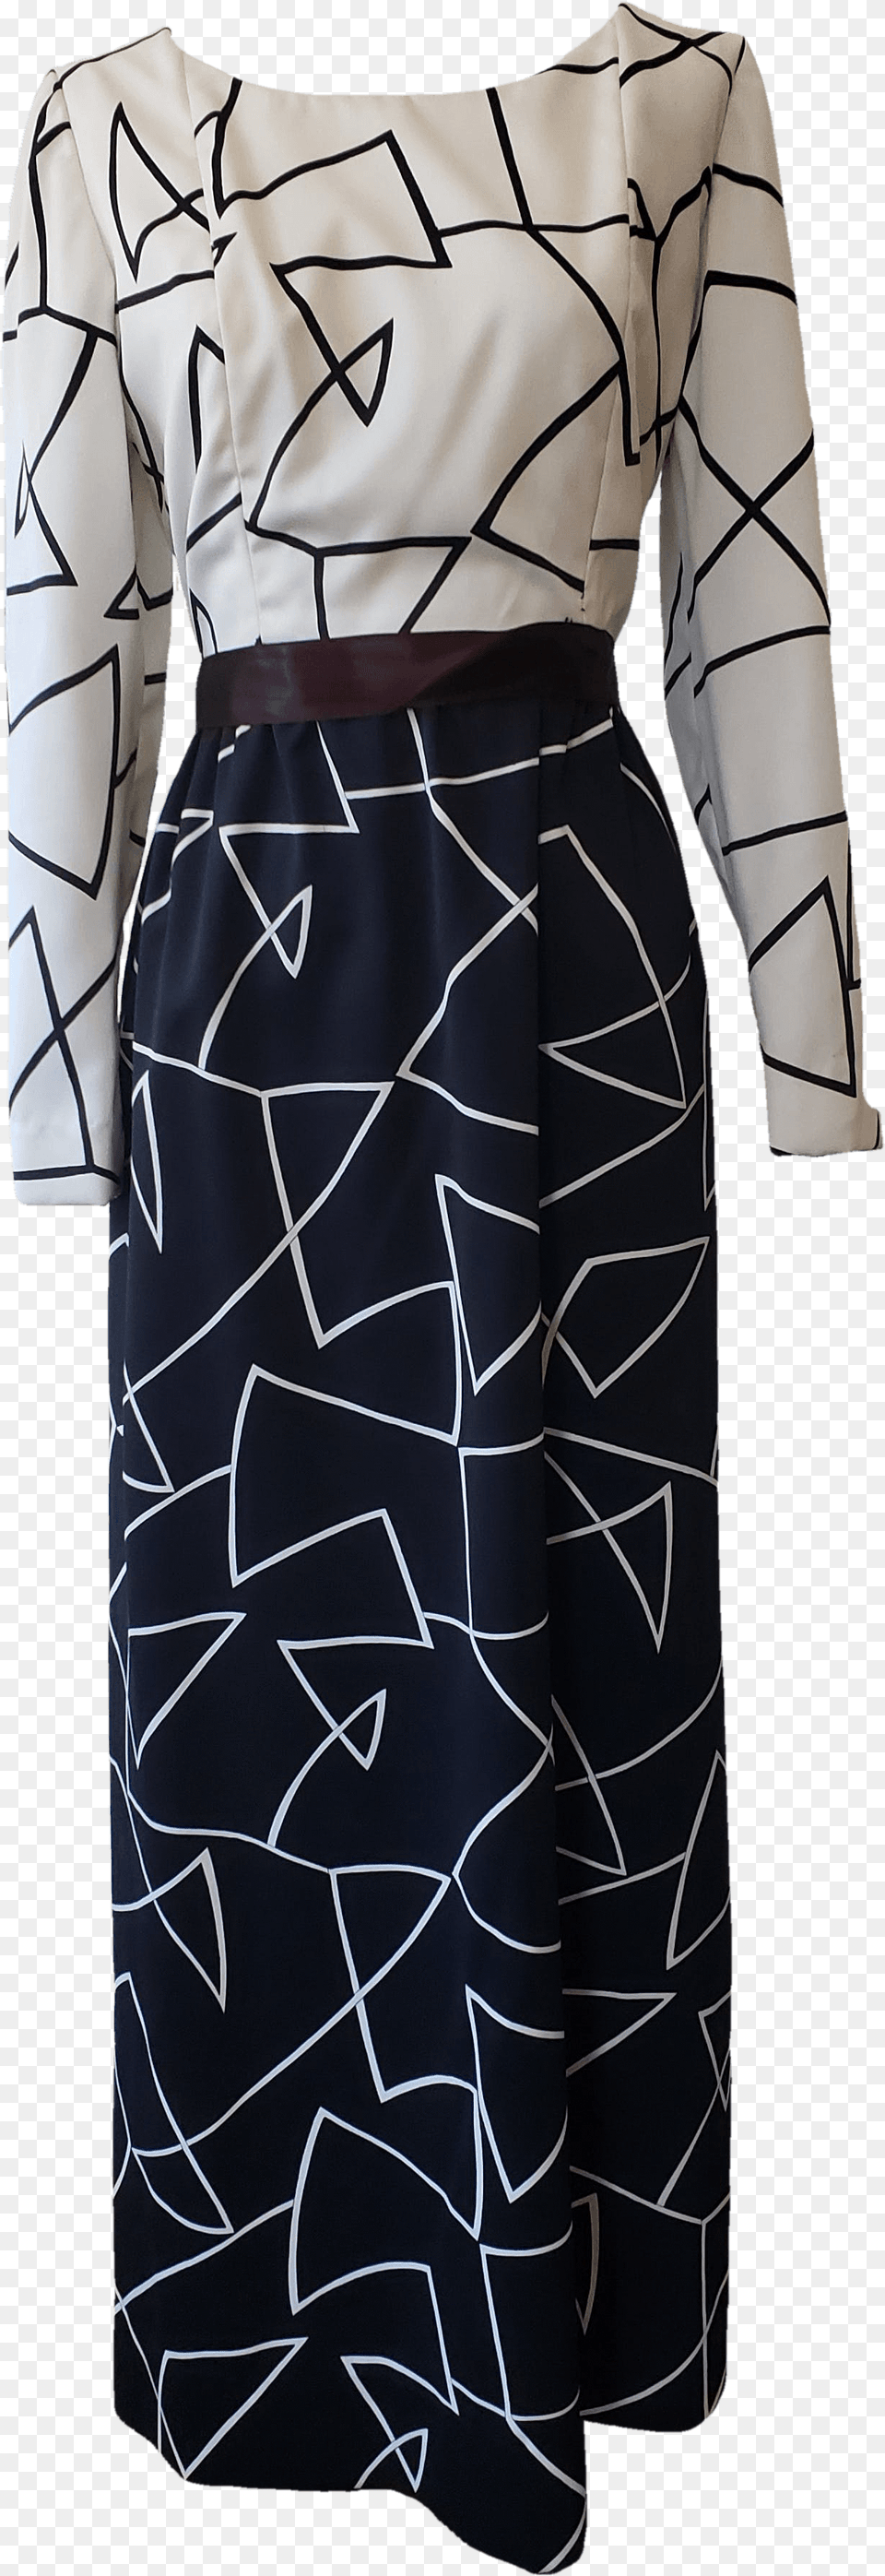 Black And White Geometric Pattern Dress By Helga A Line, Clothing, Formal Wear, Adult, Person Png Image